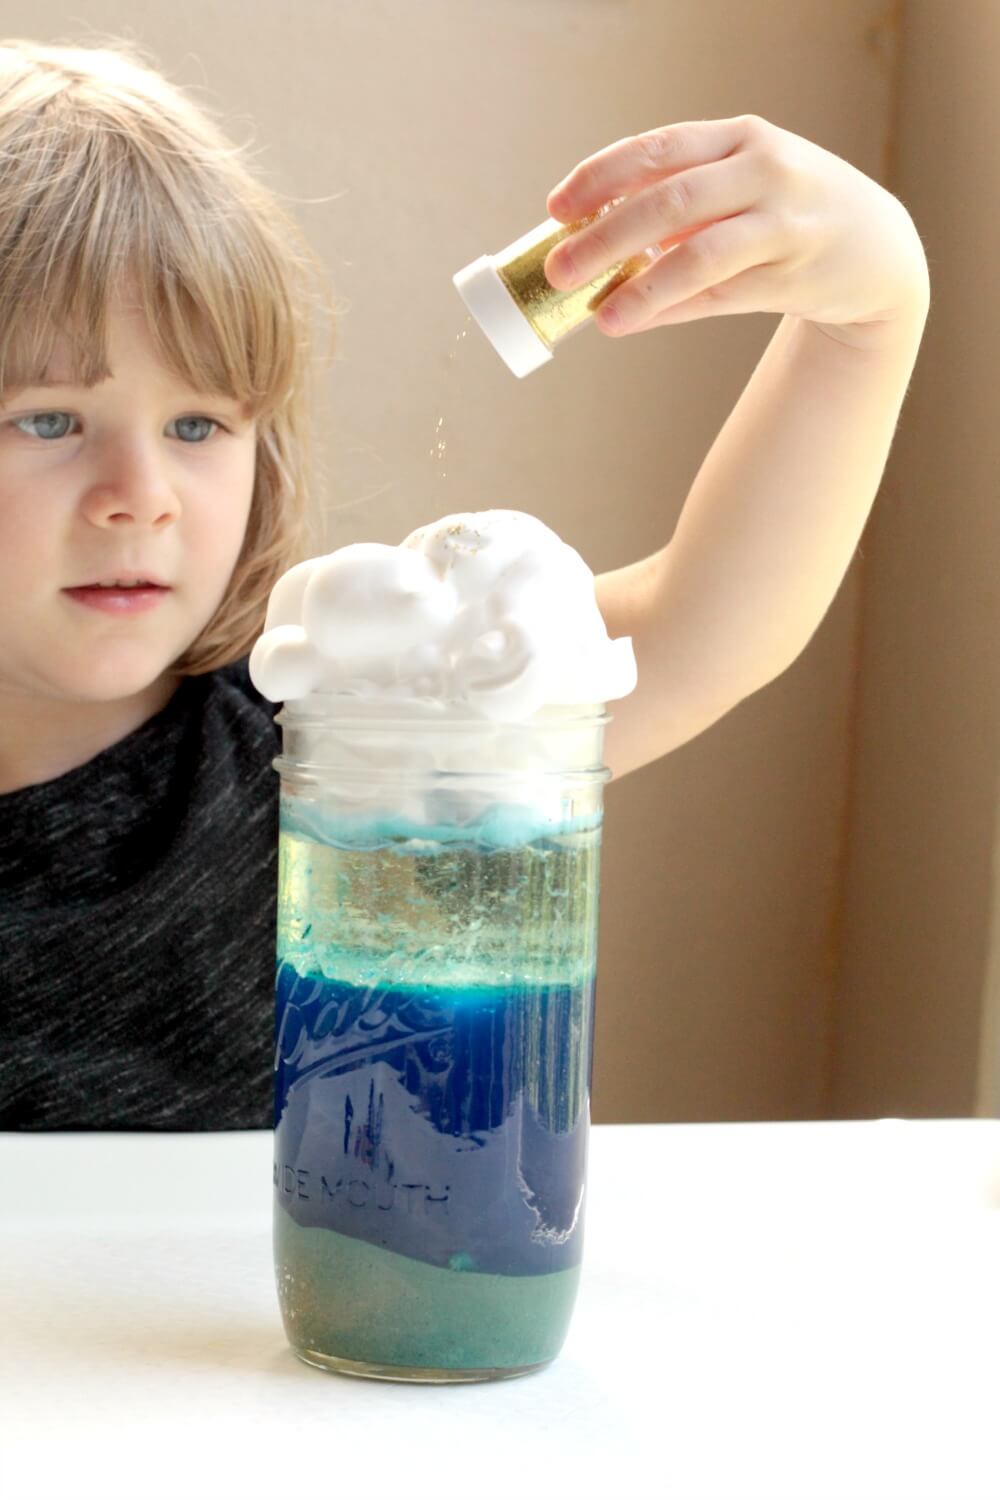 Teach kids about density and the ocean at the same time with this super fun beach density jar! Kids will love combining summer fun with science!